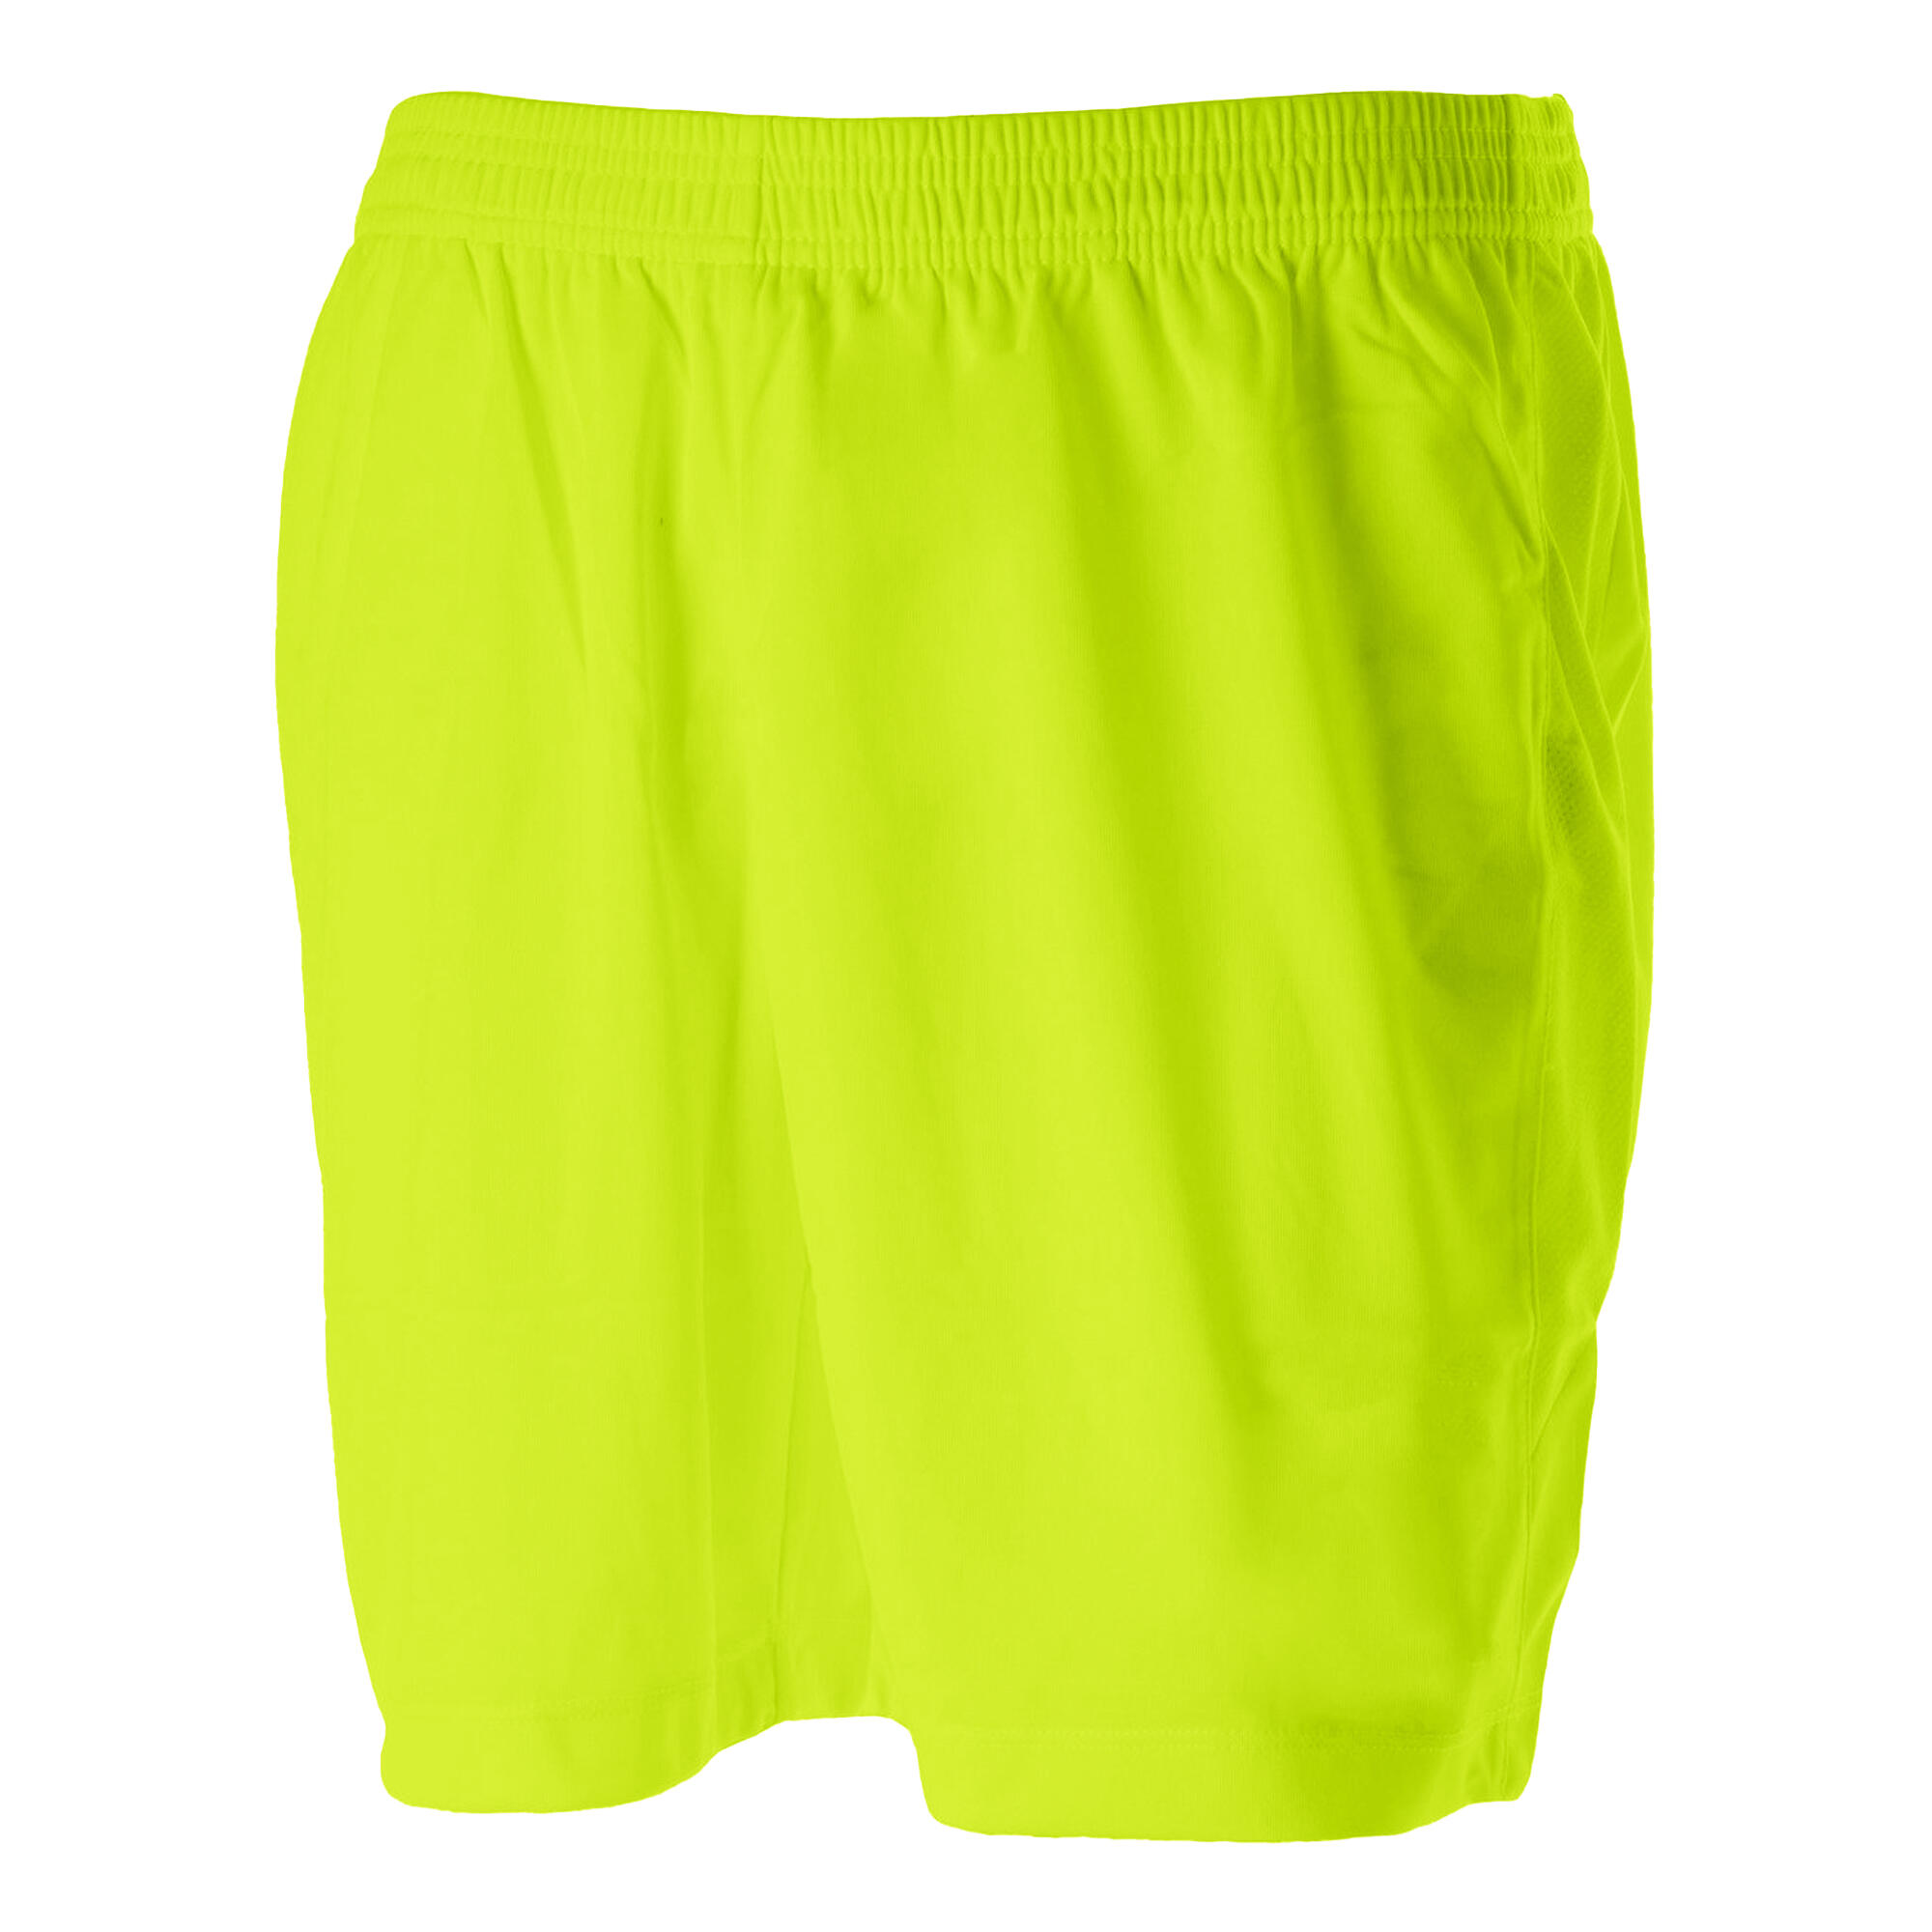 Mens Club II Shorts (Safety Yellow/Carbon) 2/3